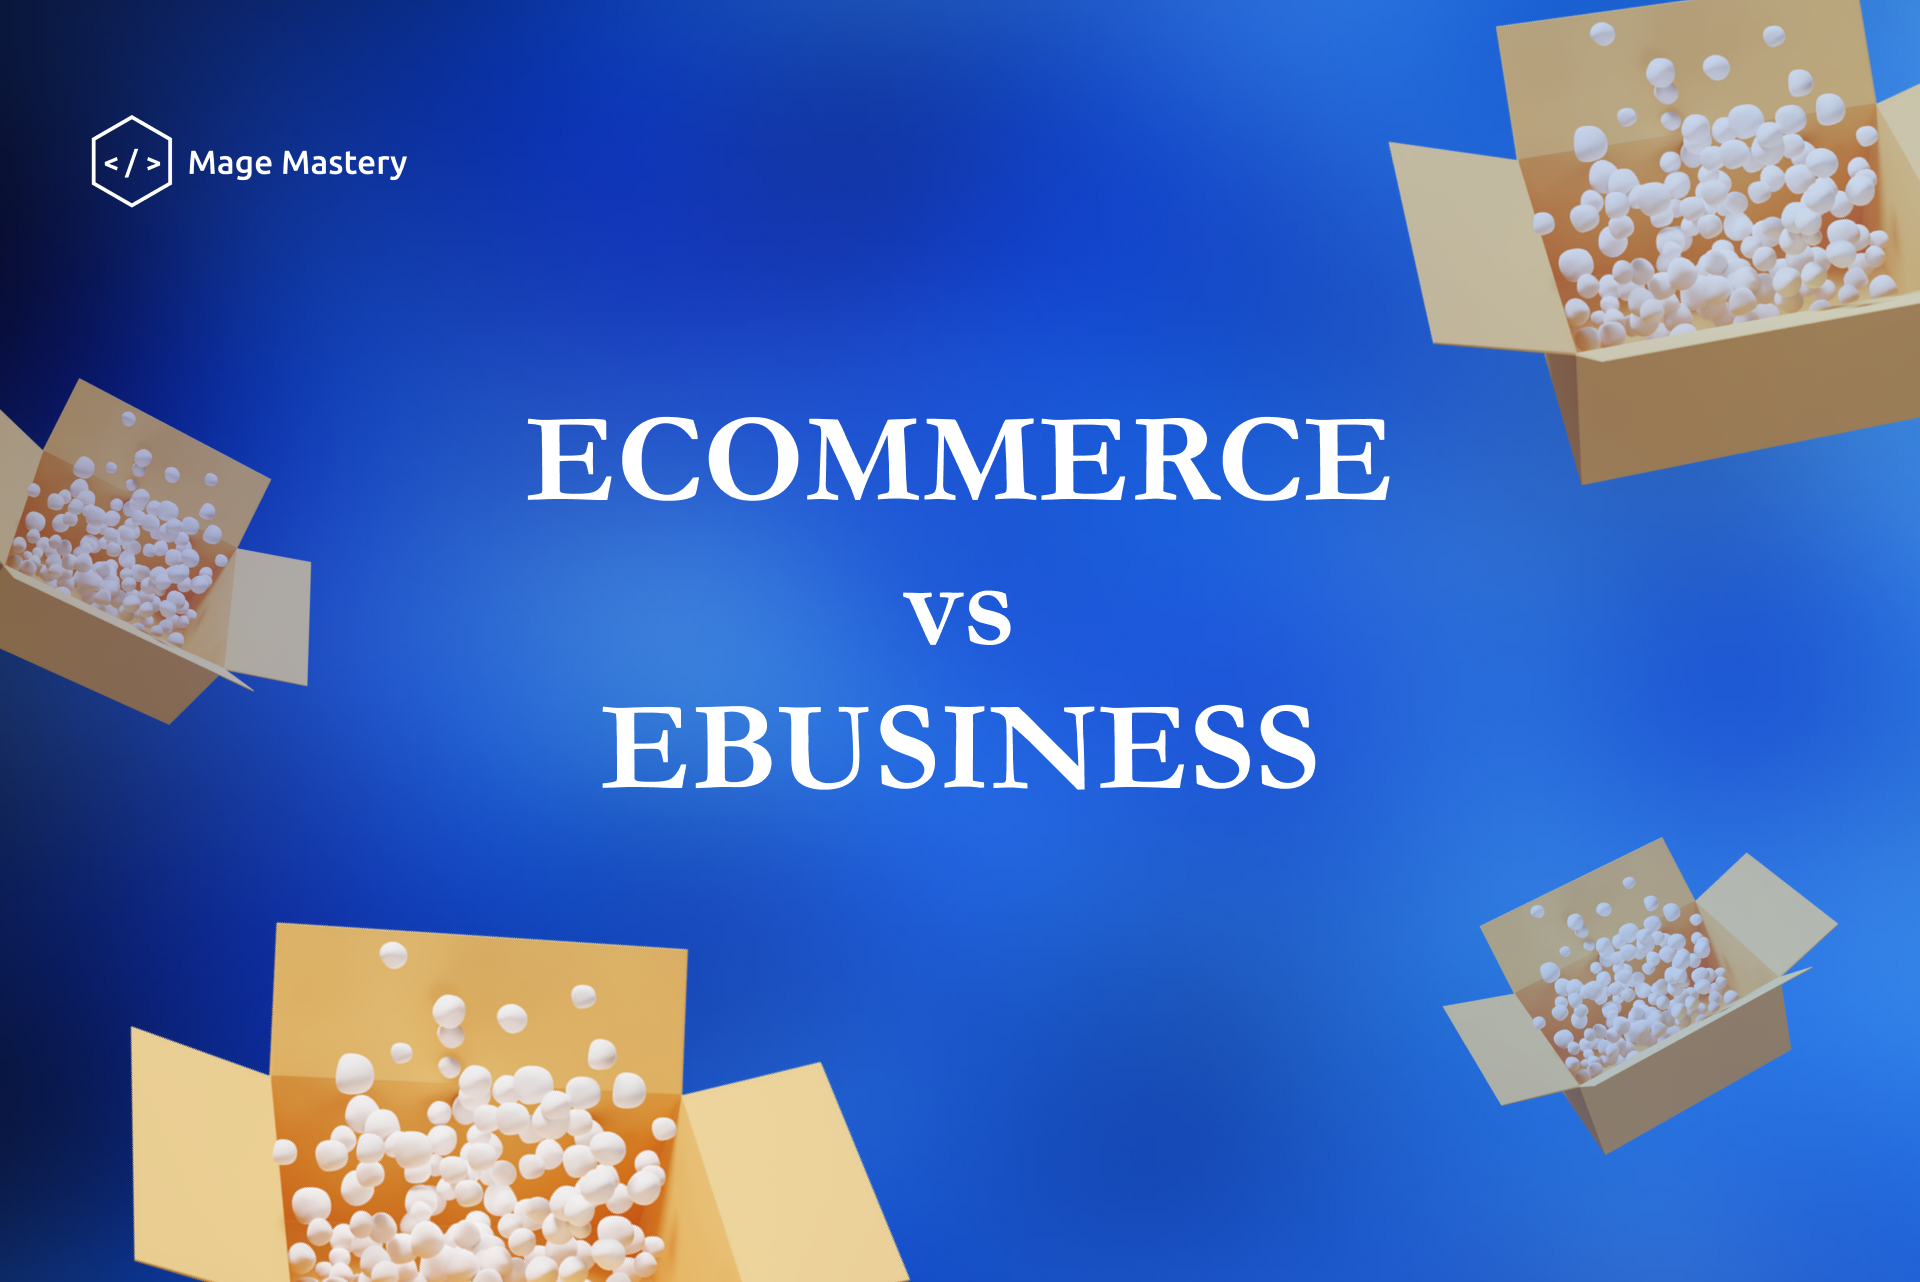 The difference between eCommerce and eBusiness